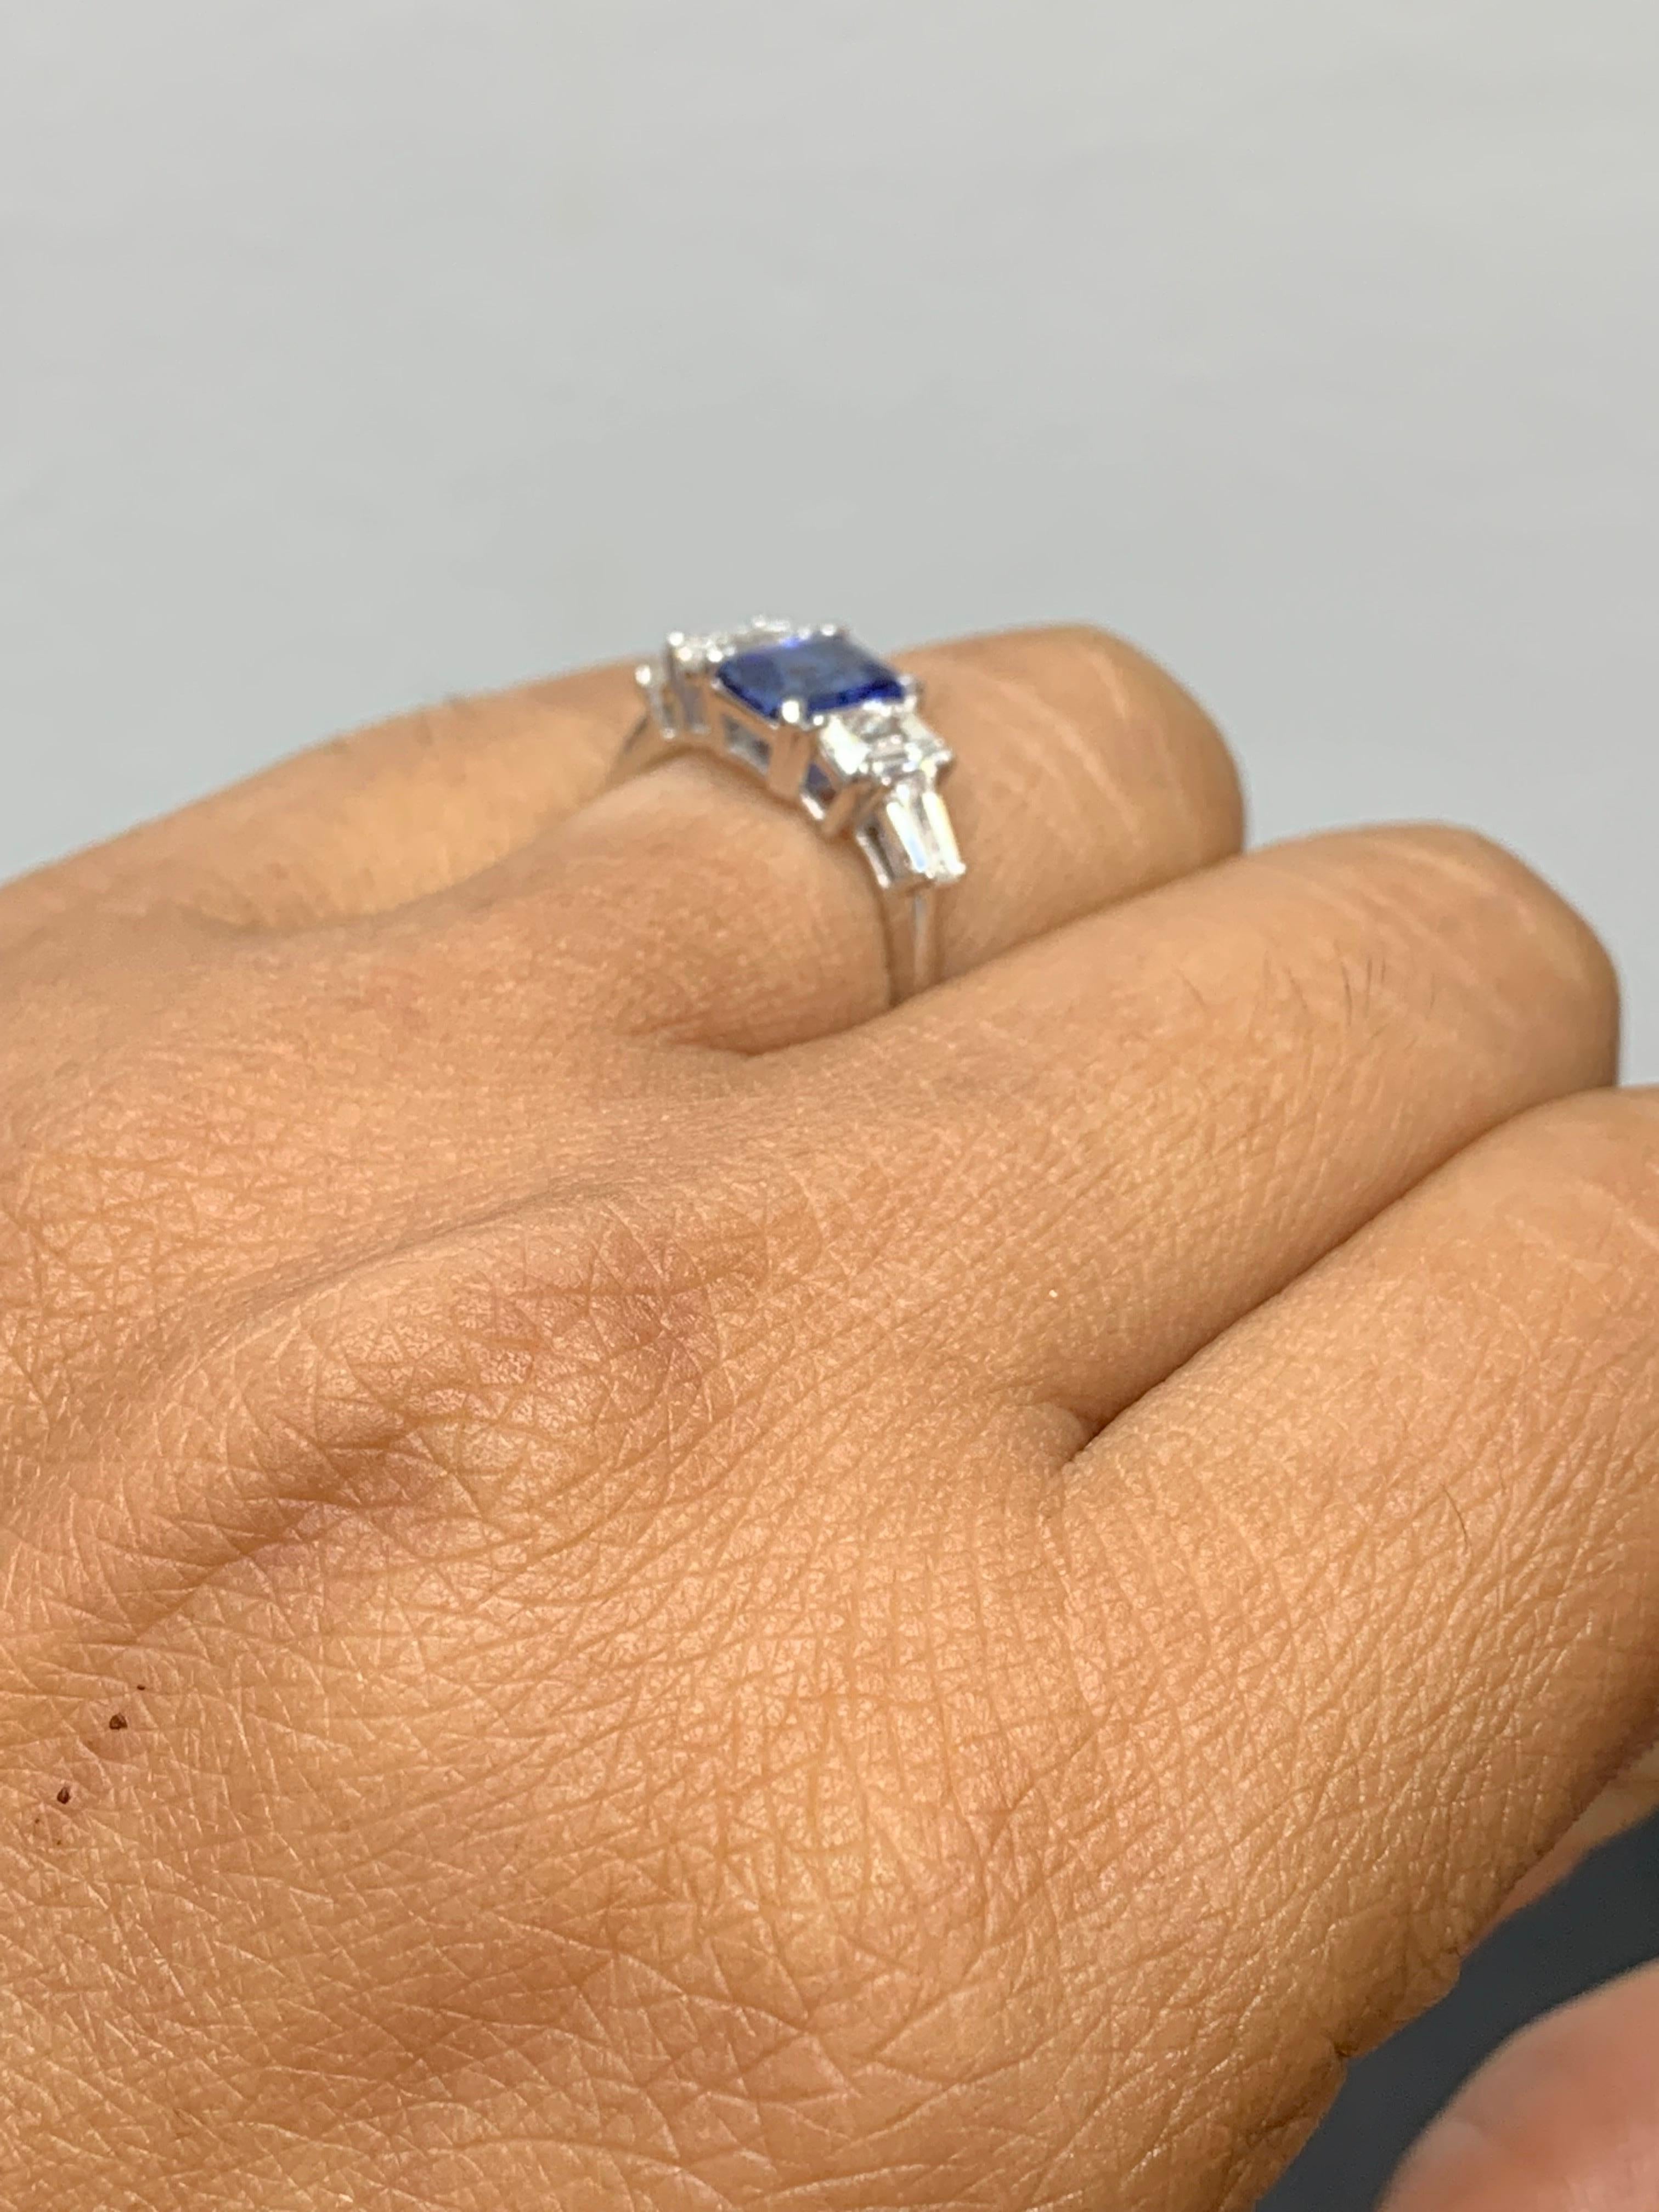 1.12 Carat Emerald Cut Blue Sapphire and Diamond 5 Stone Ring in 14K White Gold For Sale 7